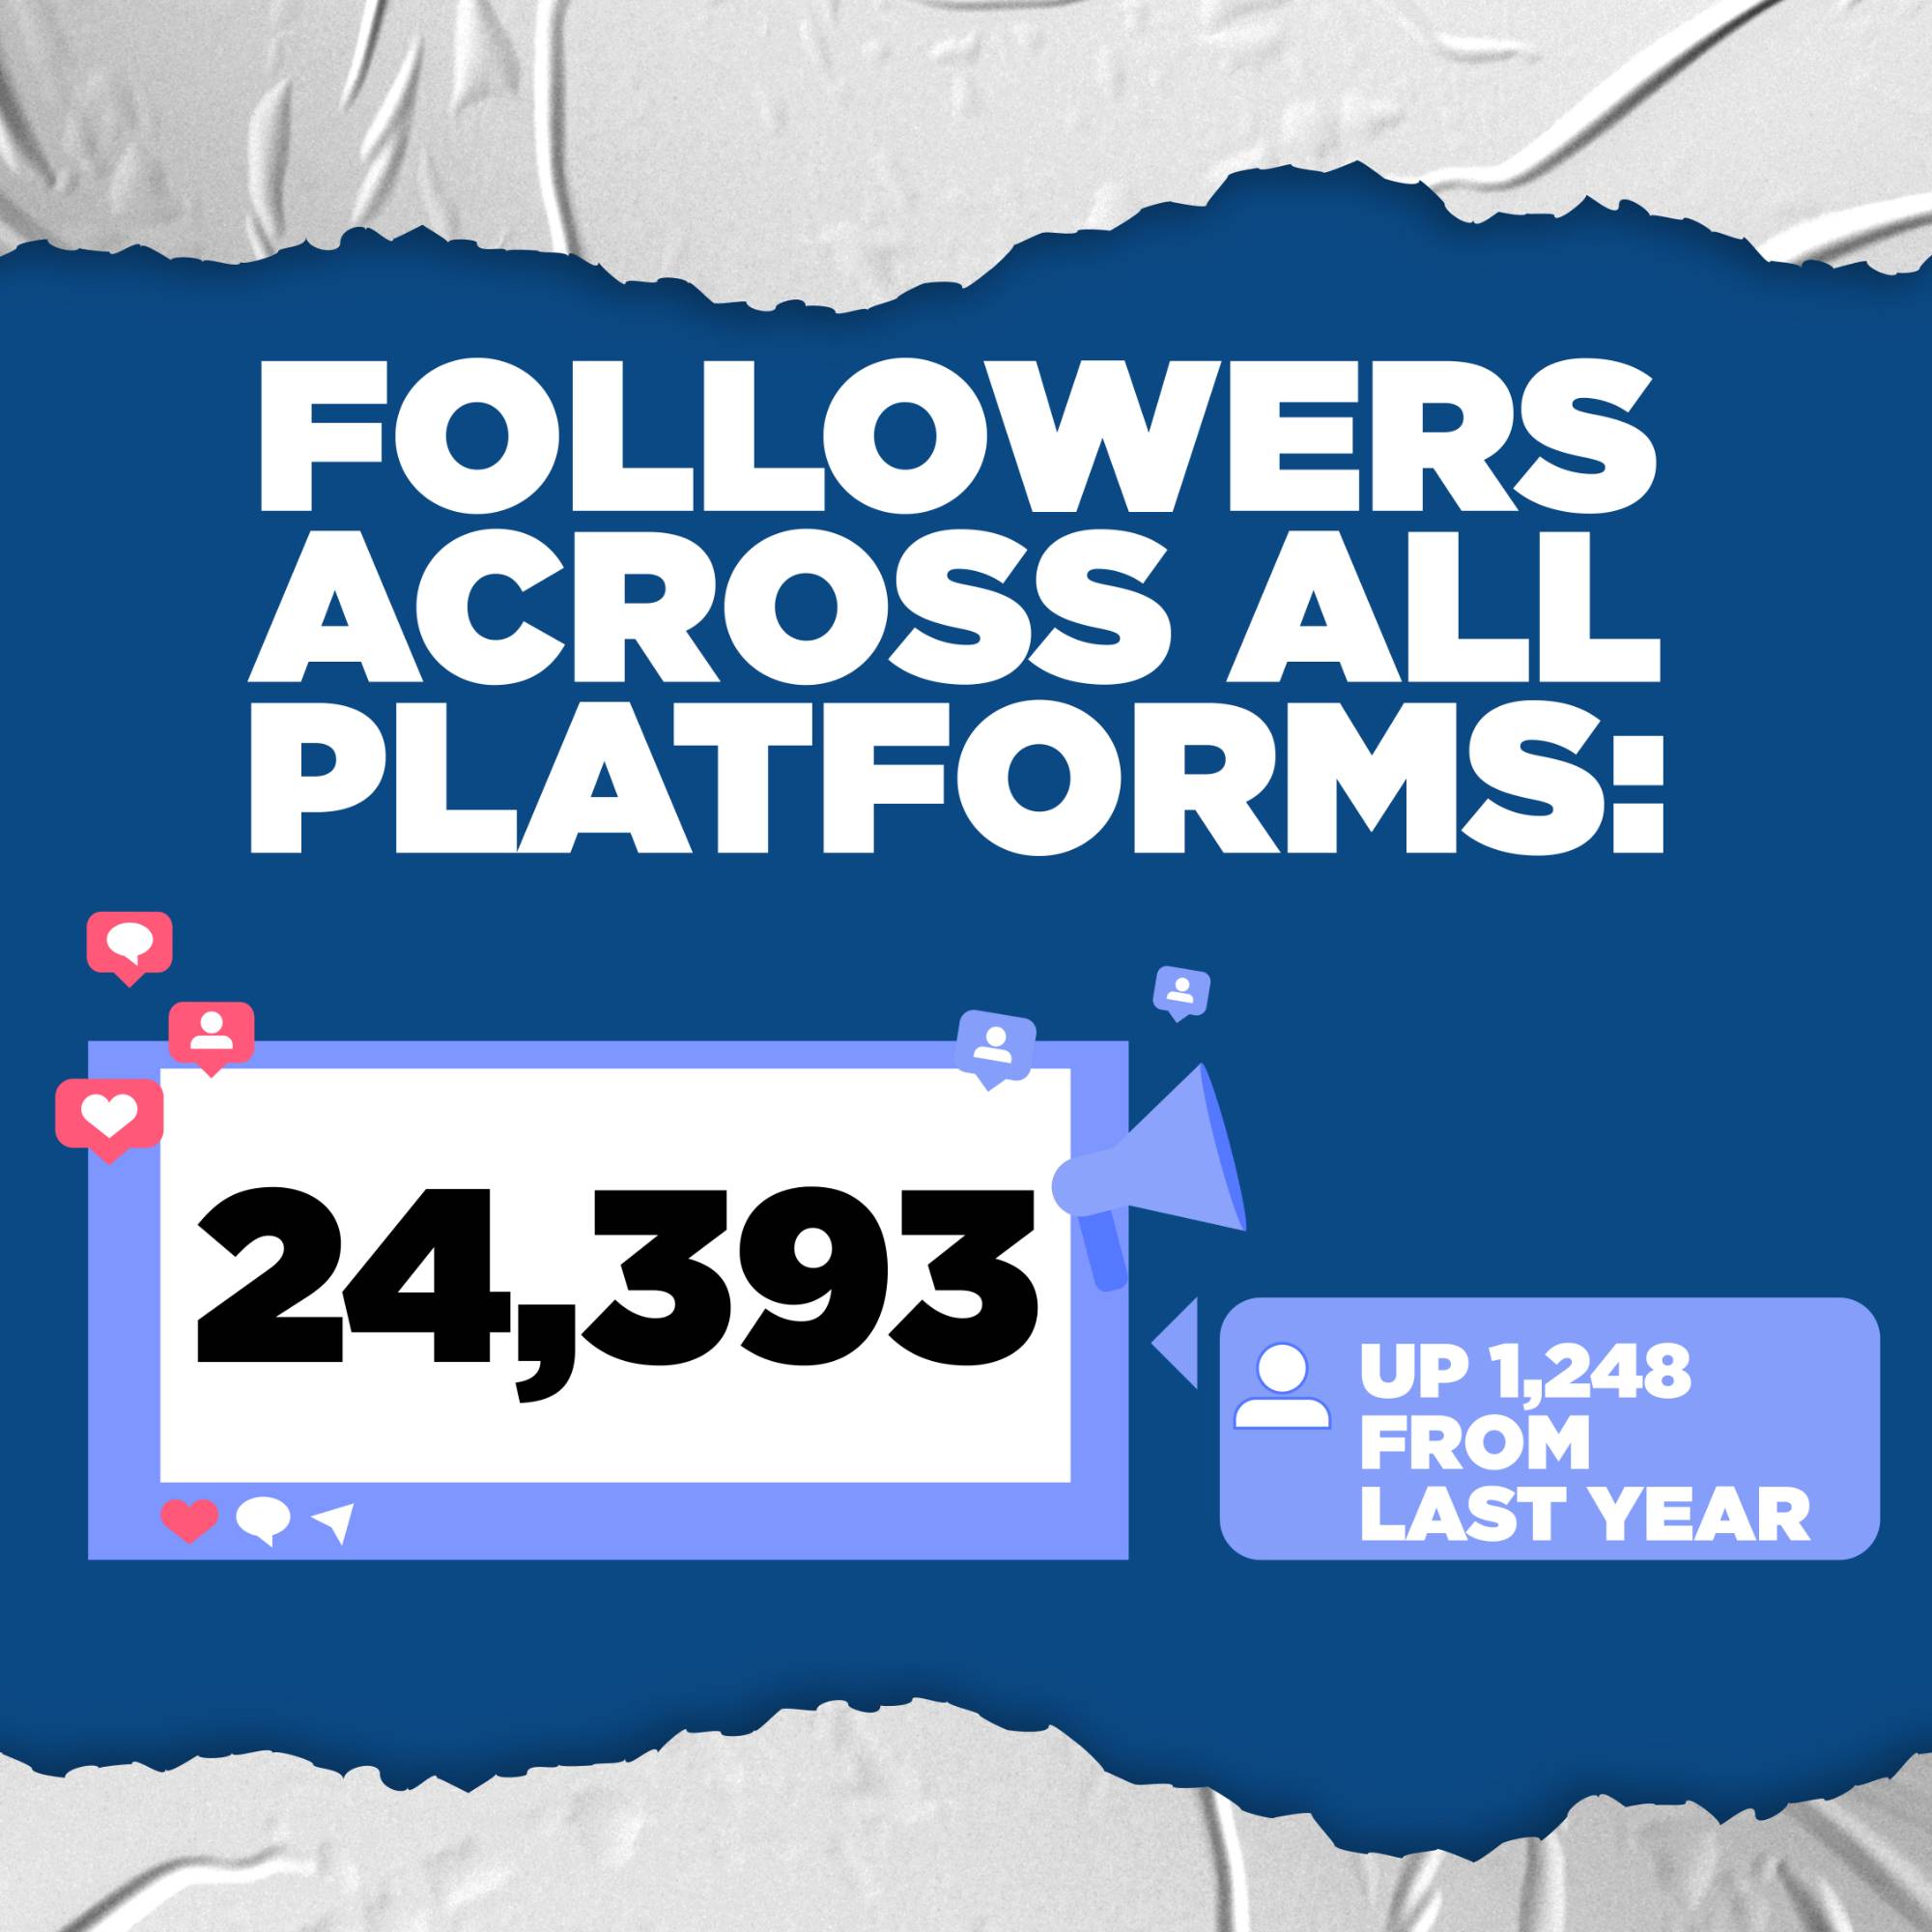 Across our social media accounts, we have a total of 24,393 followers across all platforms. Our following increased by 1,248 followers in the past year.